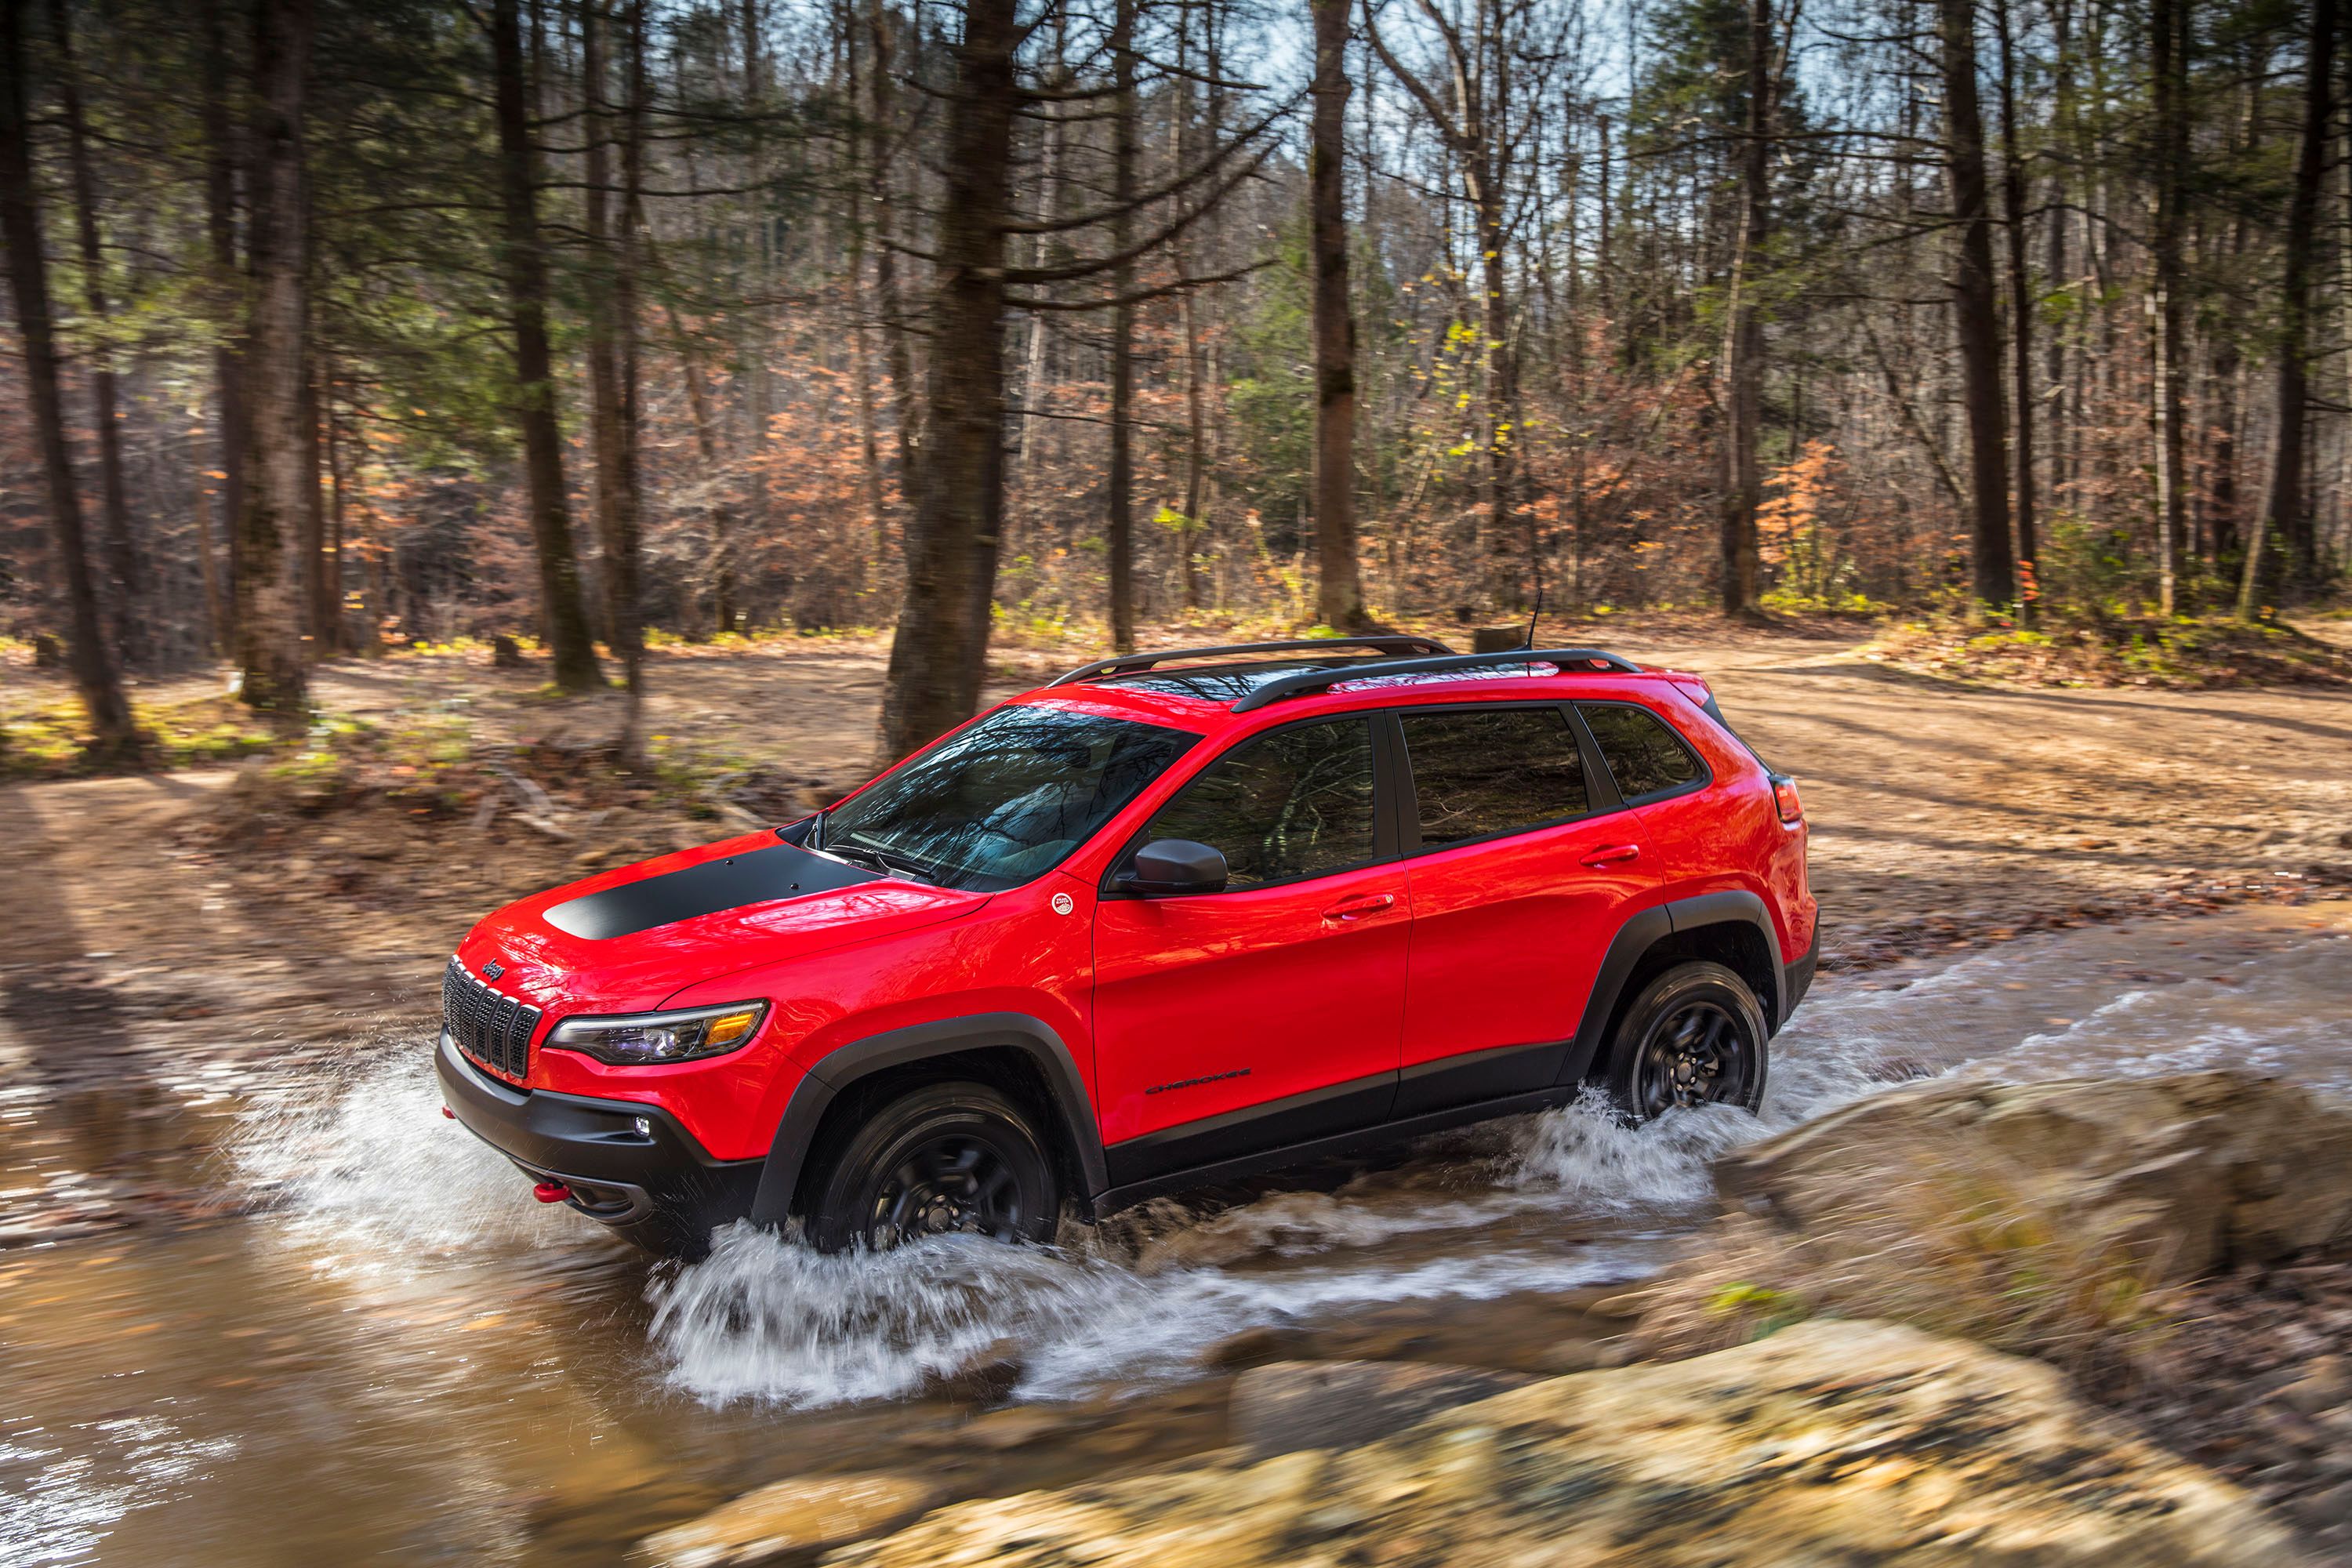 2018 Wallpaper of the Day: 2019 Jeep Grand Cherokee